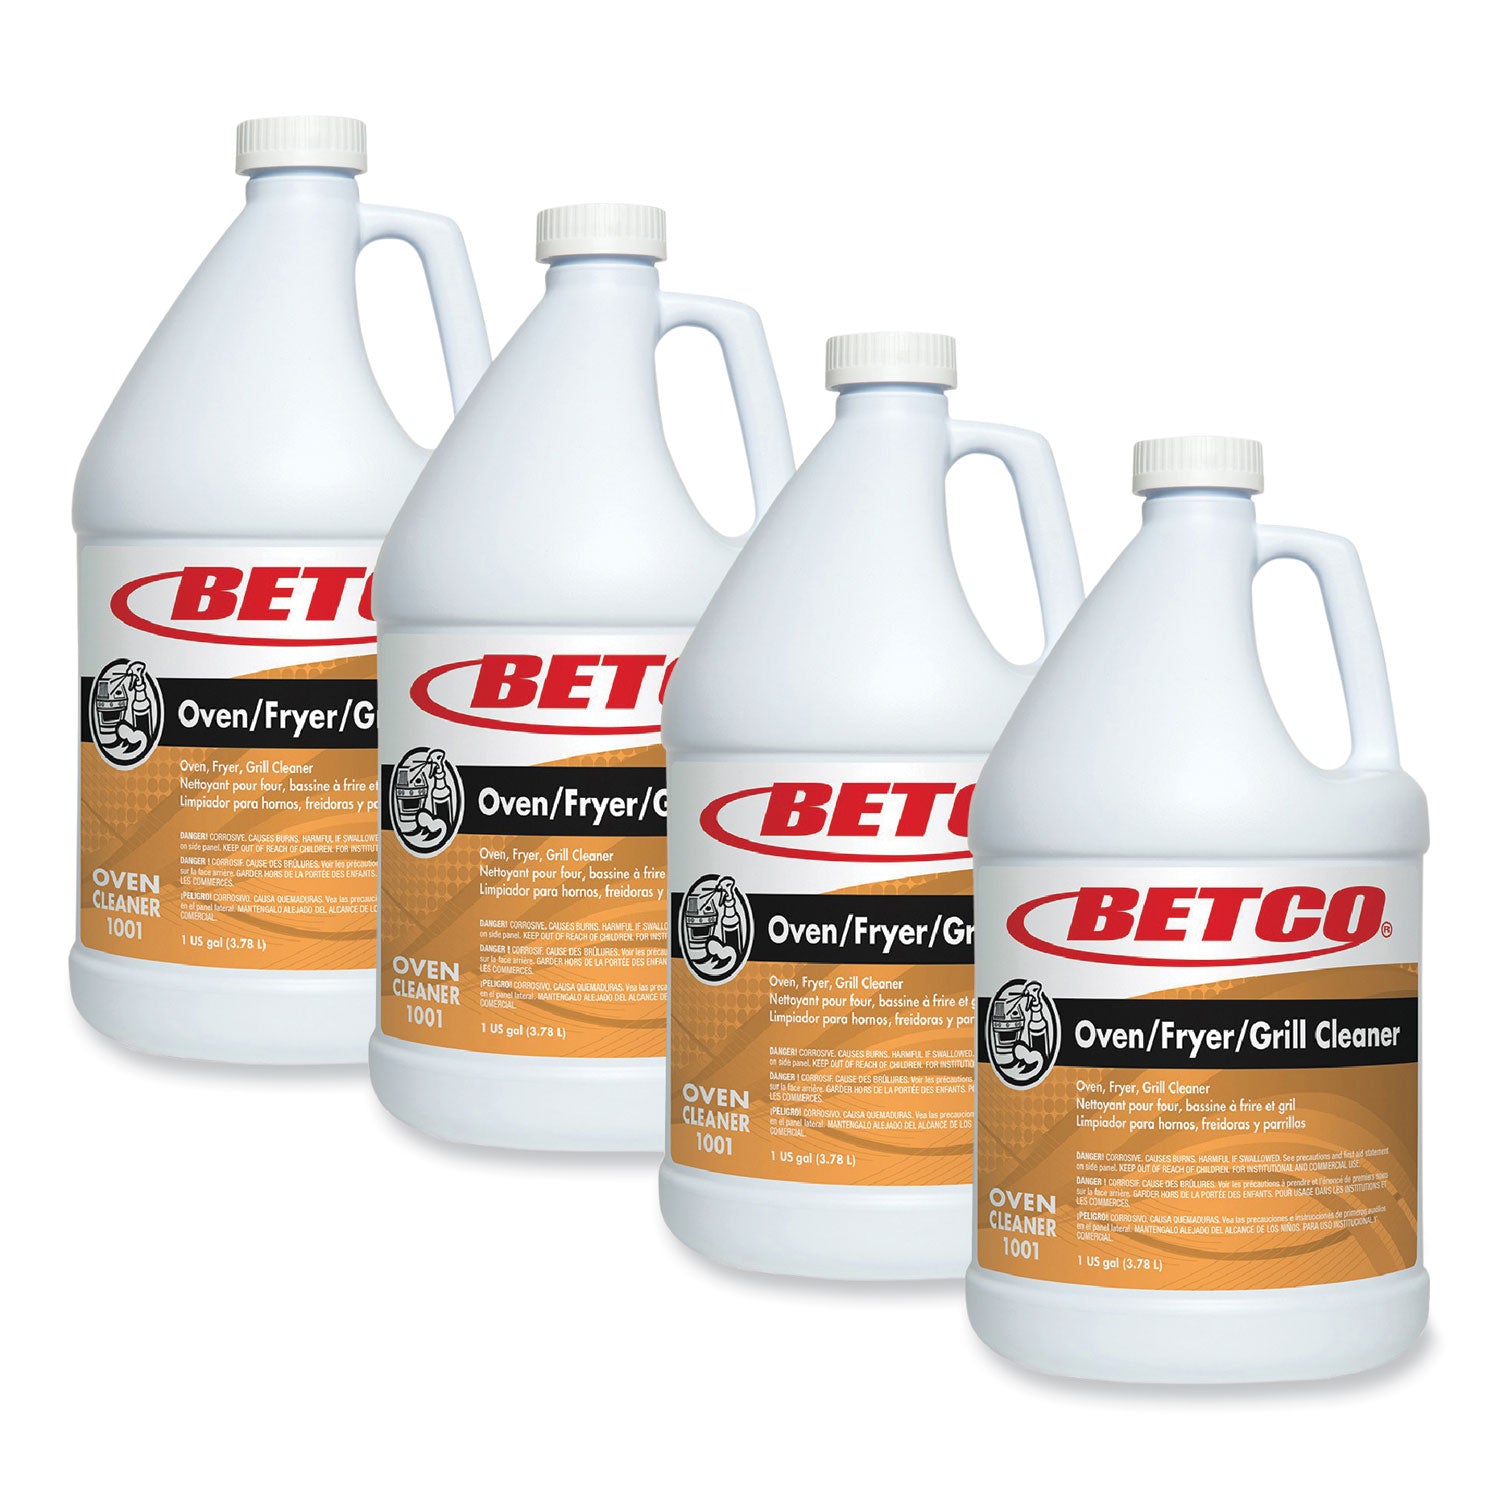 oven-fryer-grill-cleaner-characteristic-scent-1-gal-bottle-4-carton_bet10010400 - 4